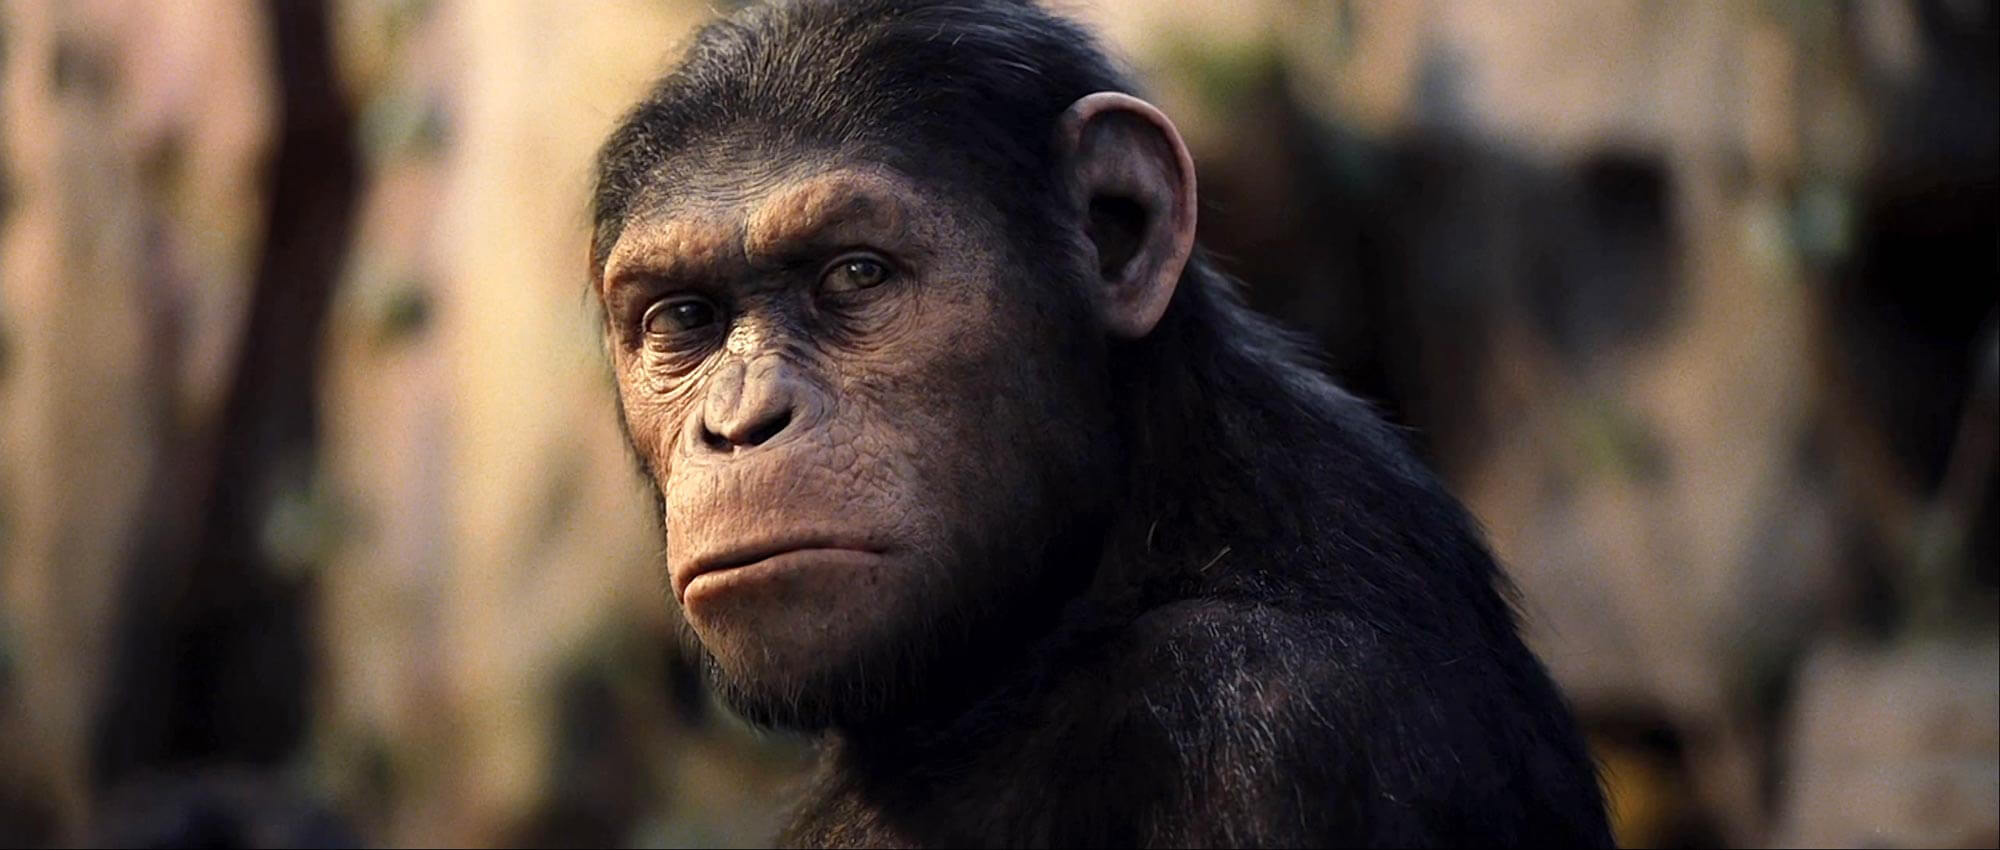 Rise of the Planet of the Apes | PETA